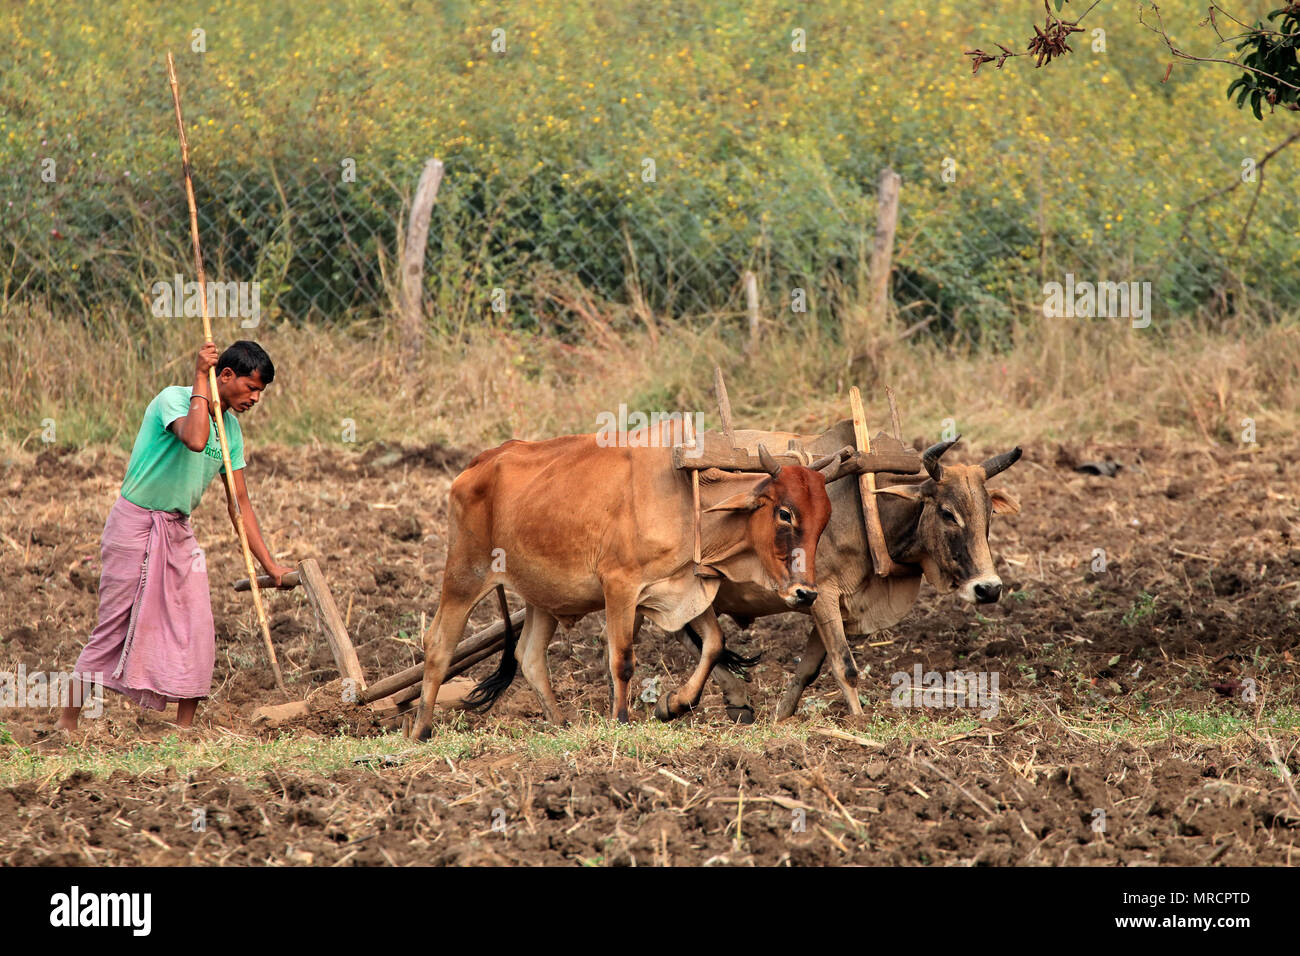 Jabalpur, India - November 28, 2015: A rural Indian farmer plowing his field using a traditional wooden plow and ox team Stock Photo